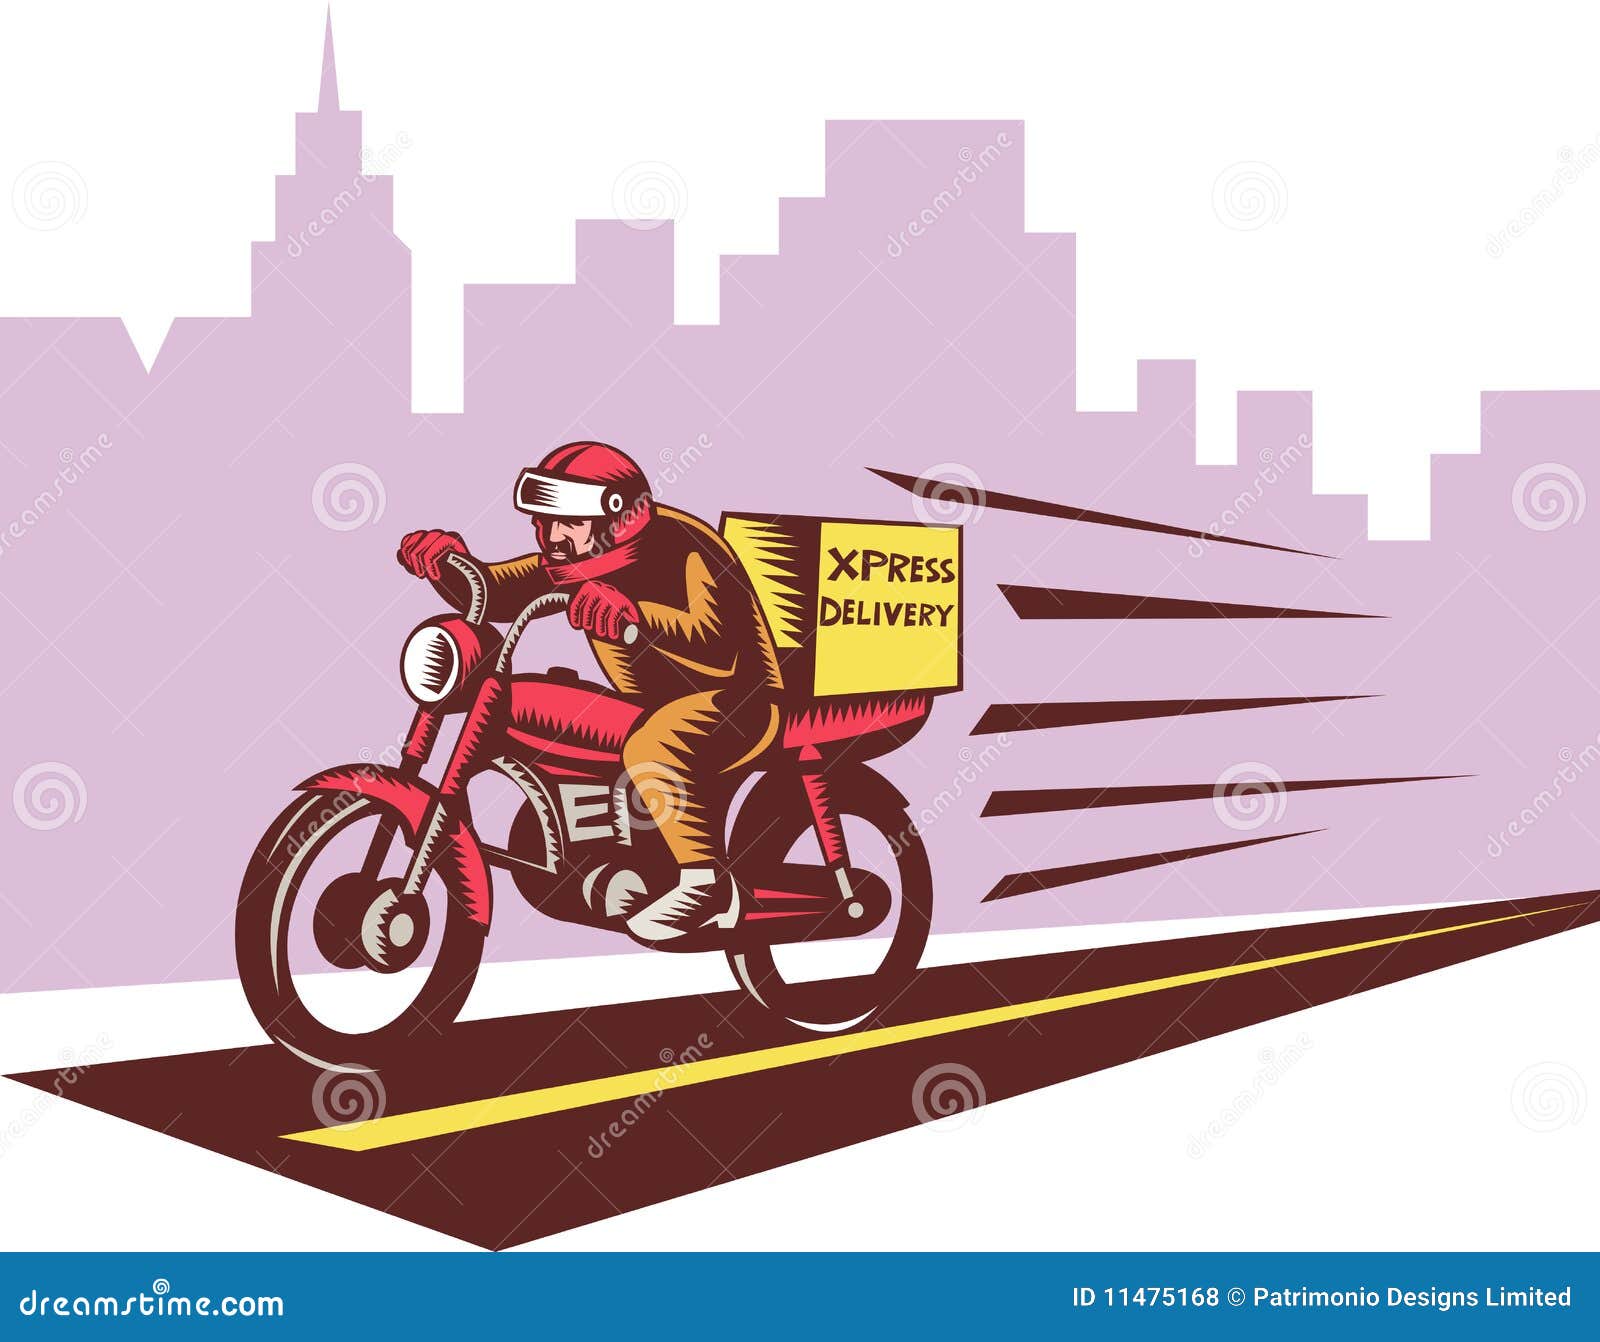 delivery clipart free - photo #42